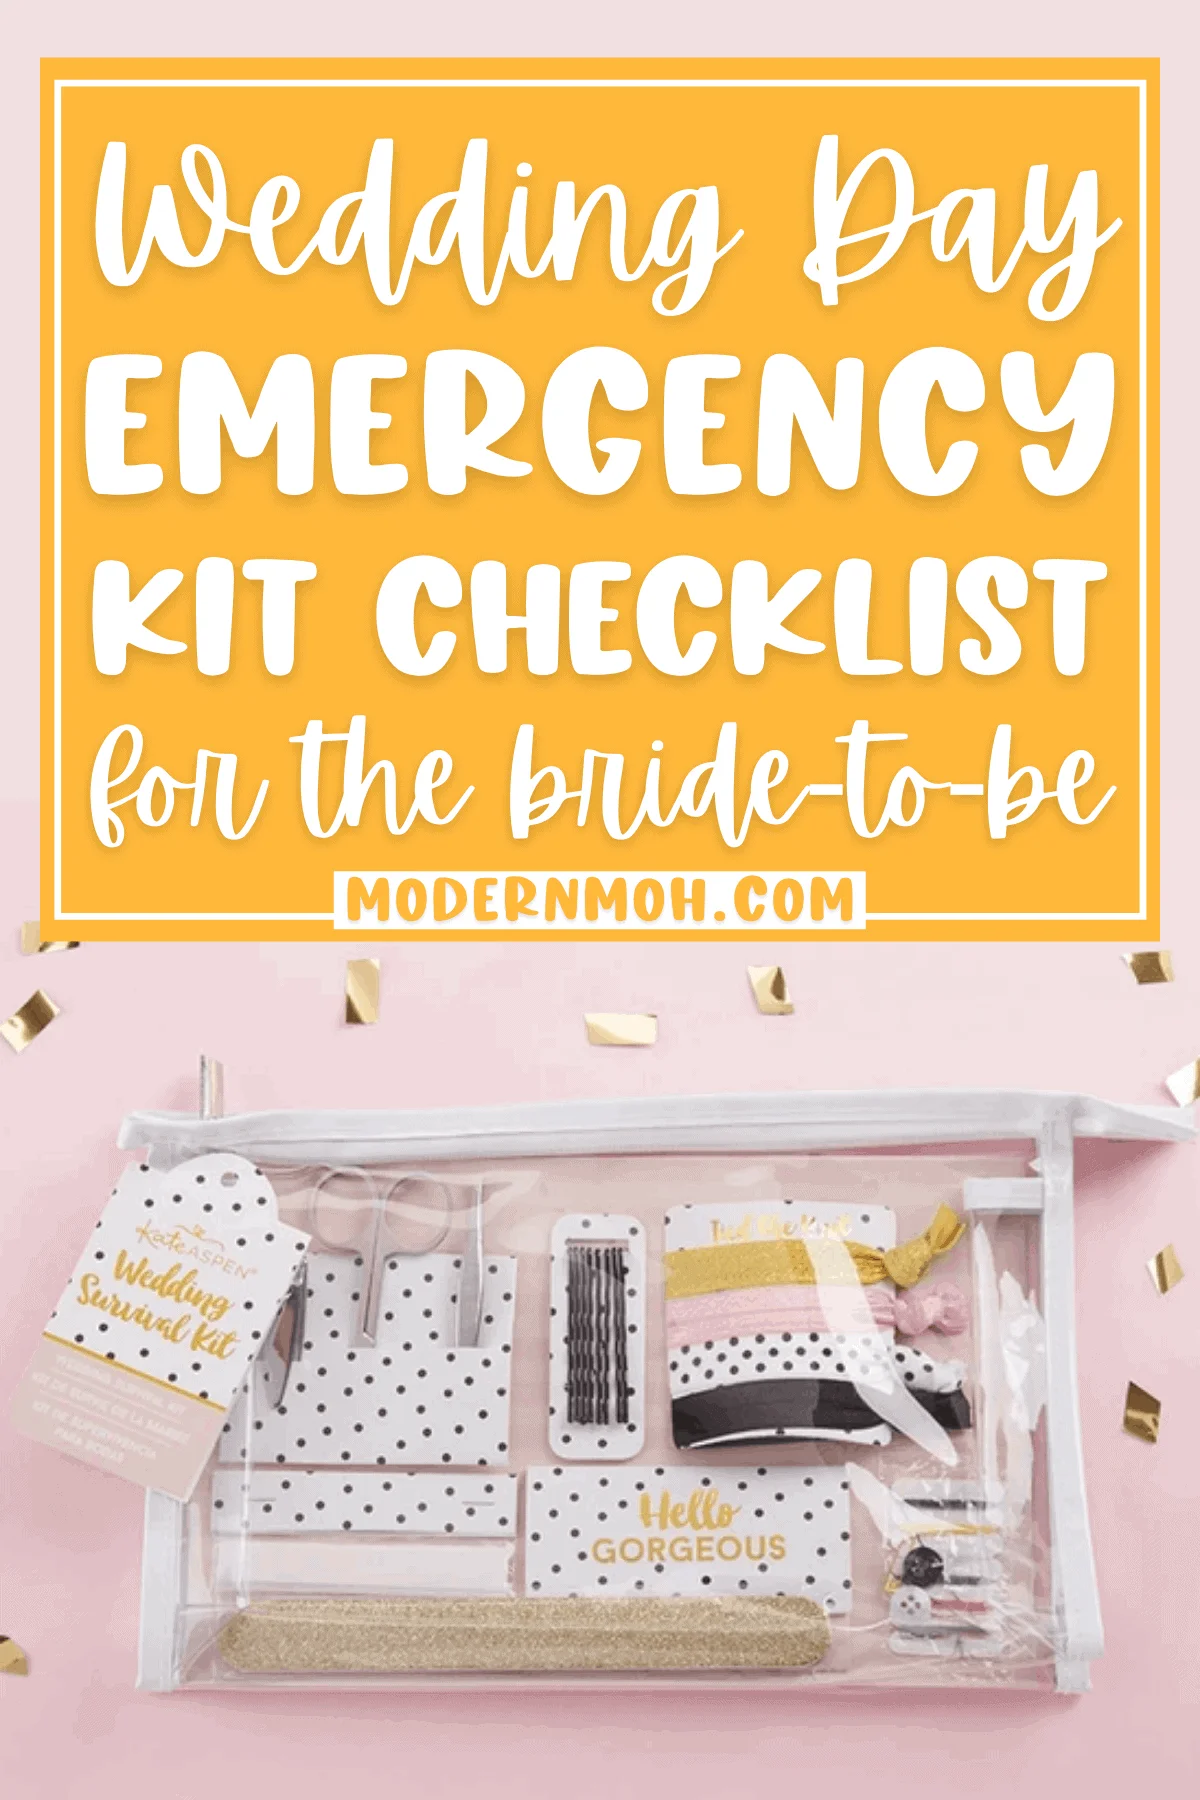 Wedding Day Emergency Kit: Because It’s Better to Be Safe Than Sorry